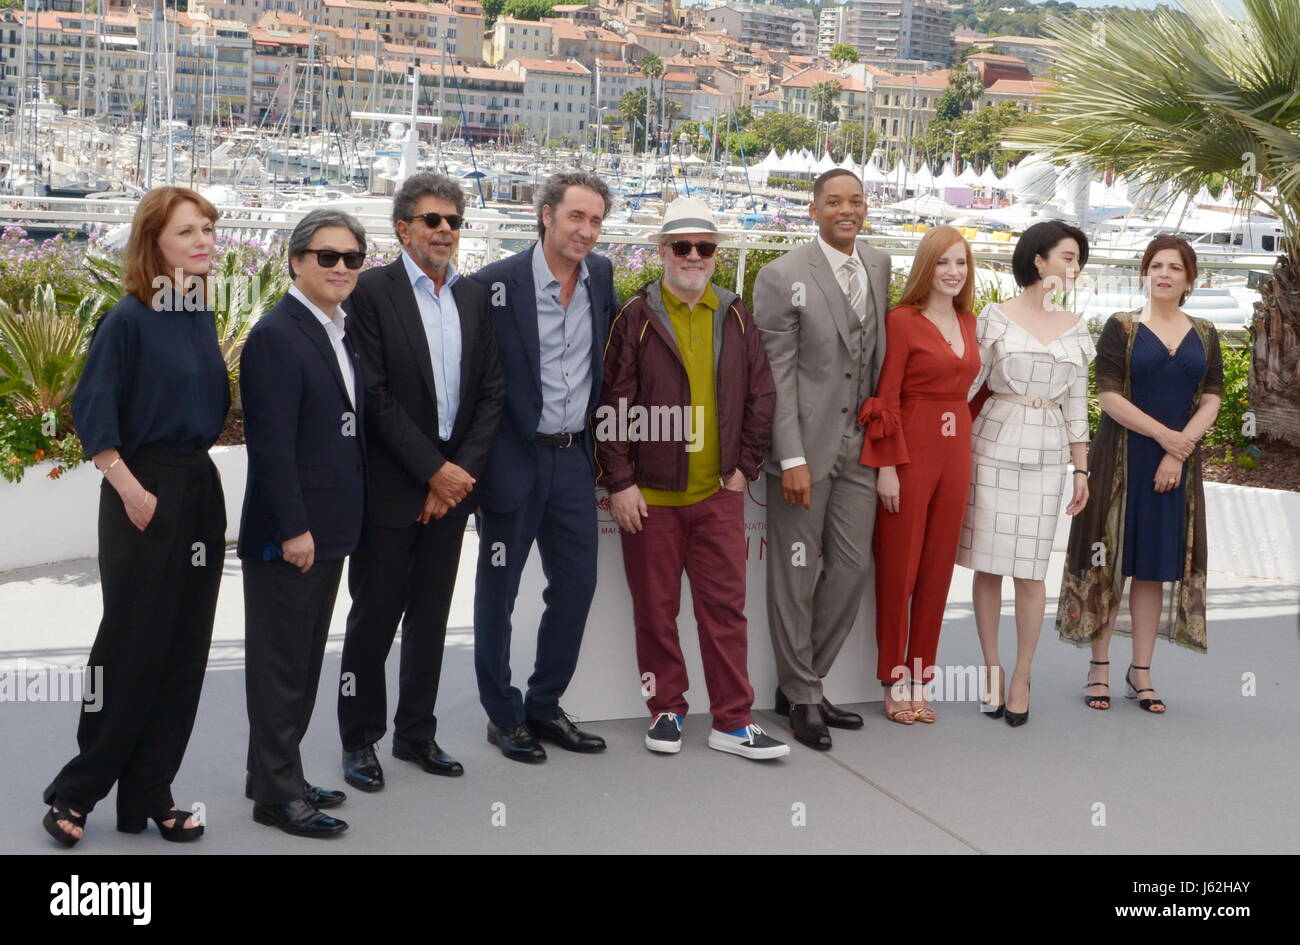 May 11, 2016 - Cannes, France - CANNES, FRANCE - MAY 17: (L-R) Jury members Agnes Jaoui, Fan Bingbing, Jessica Chastain, and Will Smith, President of the jury Pedro Almodovar, and jury members Paolo Sorrentino, Gabriel Yared, and Park Chan-wook attend the Jury photocall during the 70th annual Cannes Film Festival at Palais des Festivals on May 17, 2017 in Cannes, France (Credit Image: © Frederick Injimbert via ZUMA Wire) Stock Photo